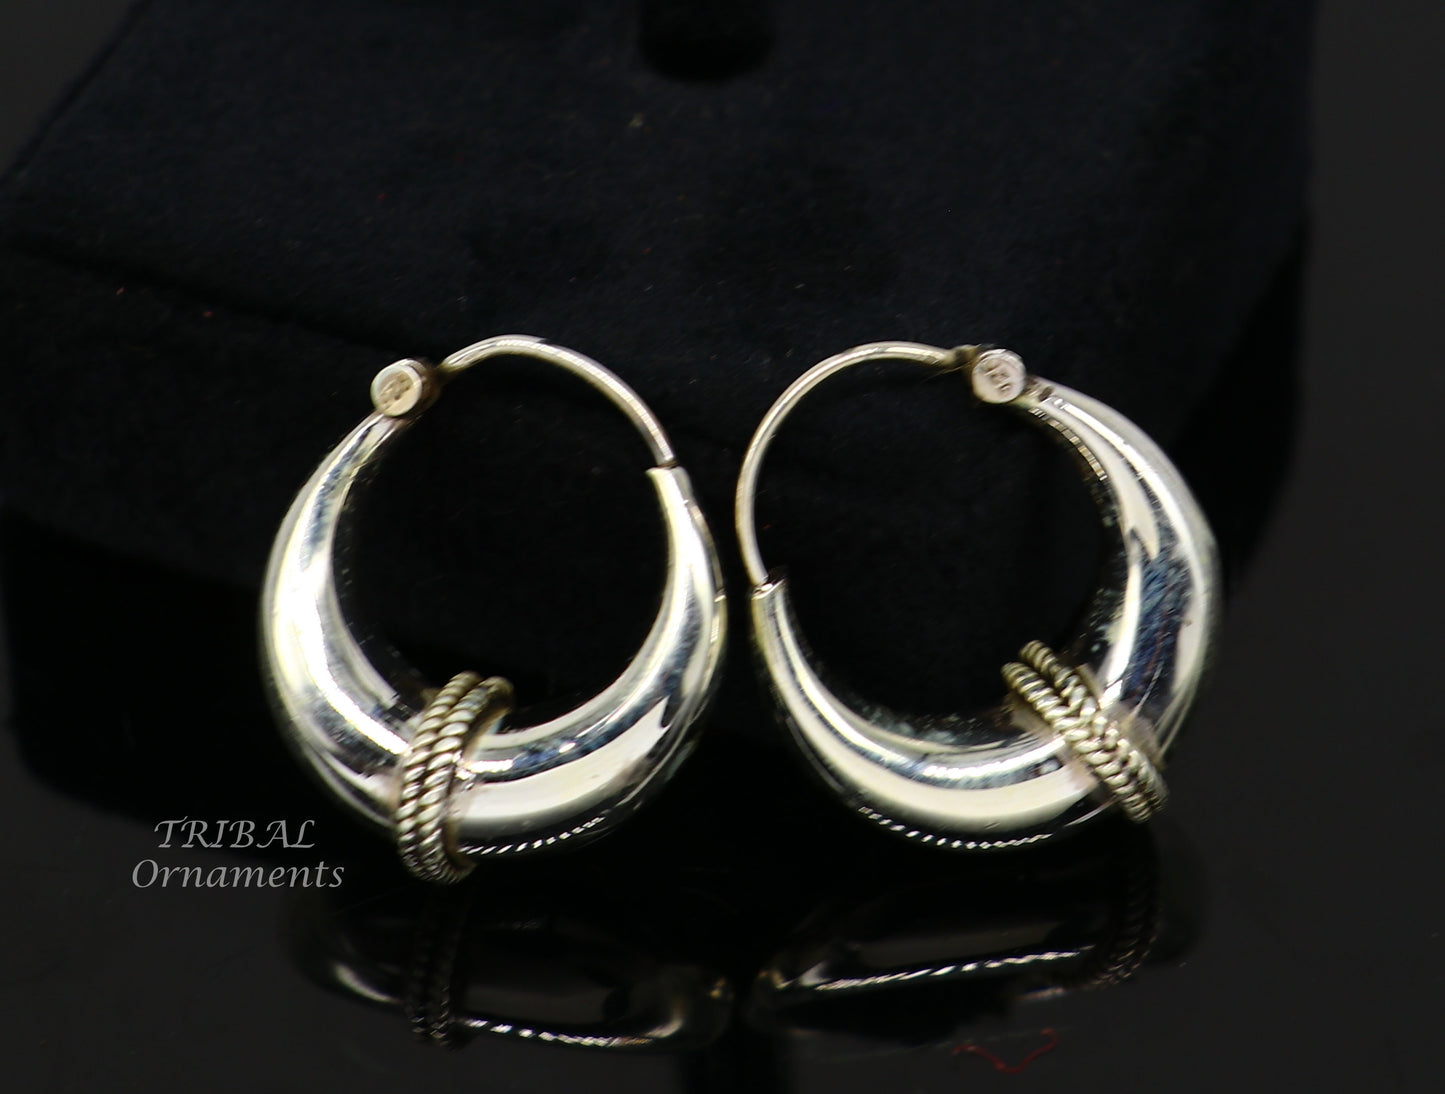 925 sterling silver handmade vintage ethnic style hoops earrings kundal,ethnic gorgeous bali tribal belly dance jewelry from india s1070 - TRIBAL ORNAMENTS